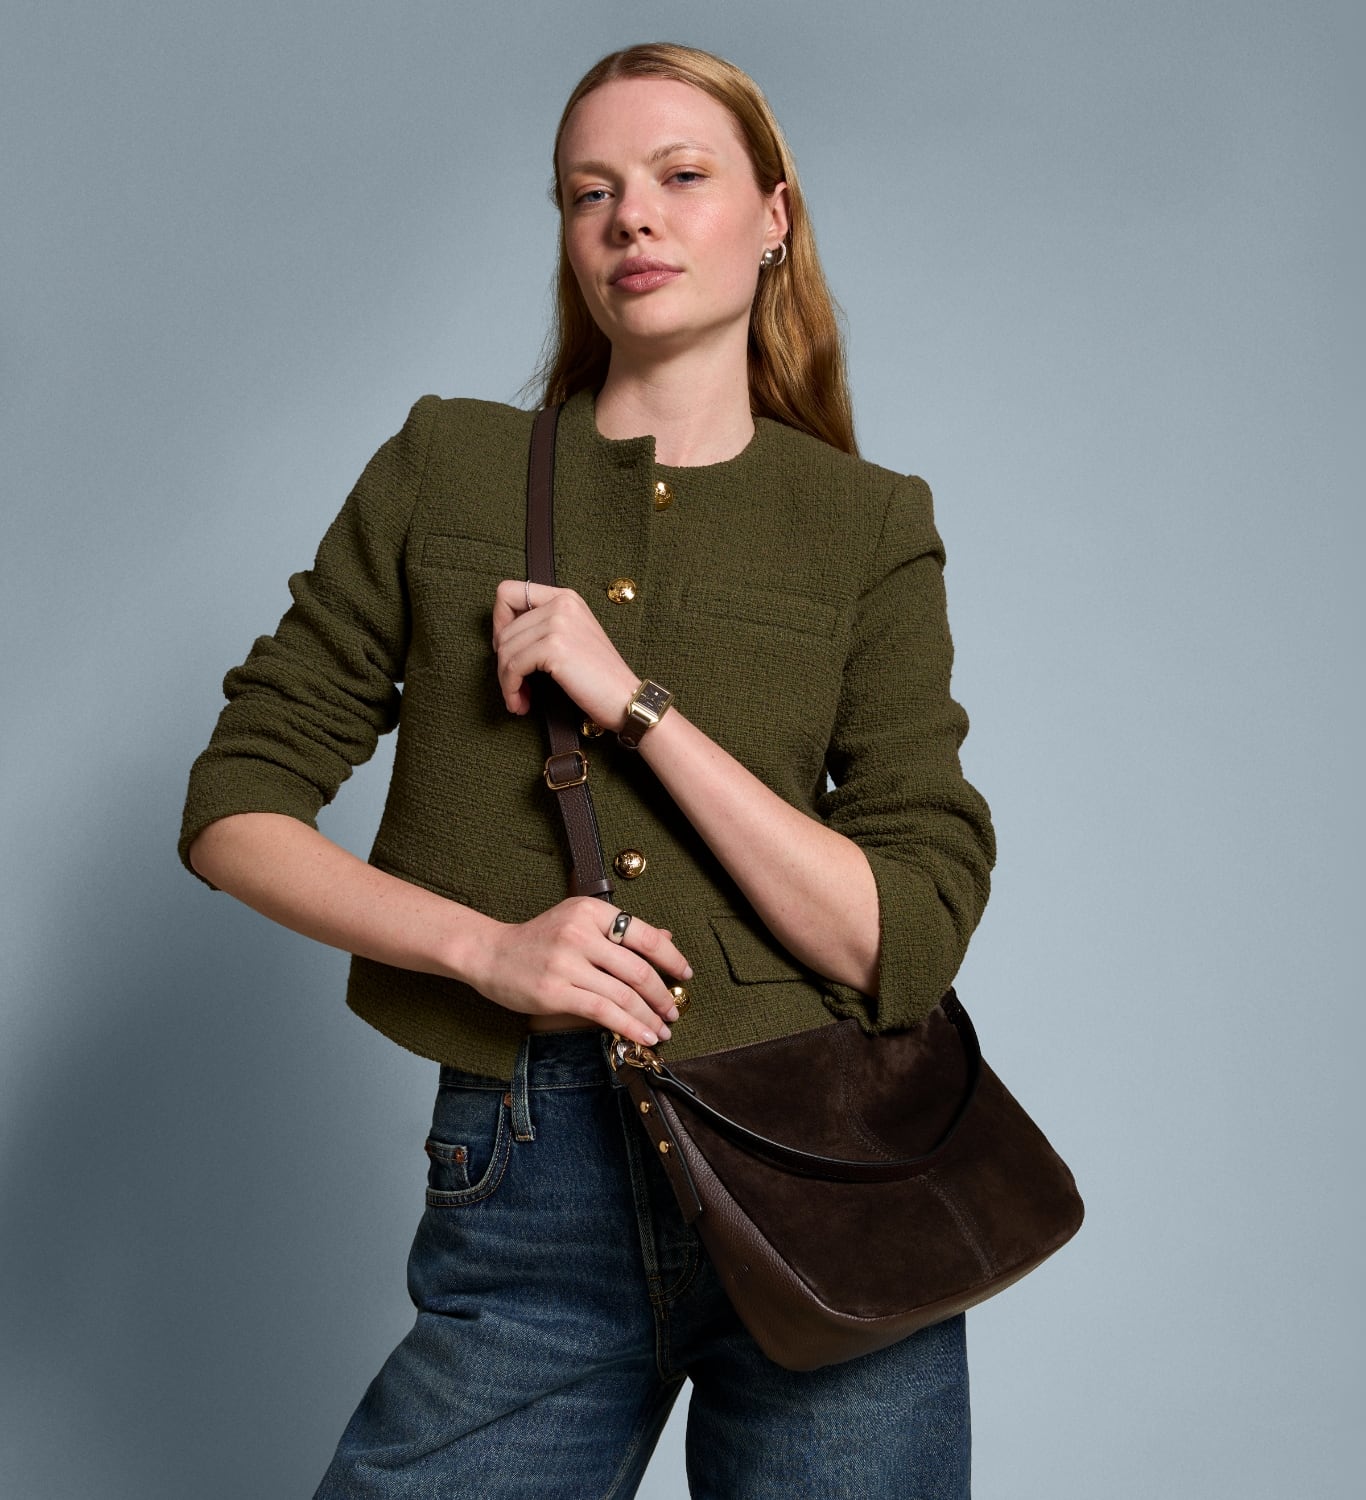 A woman wearing a brown leather Jolie crossbody bag.